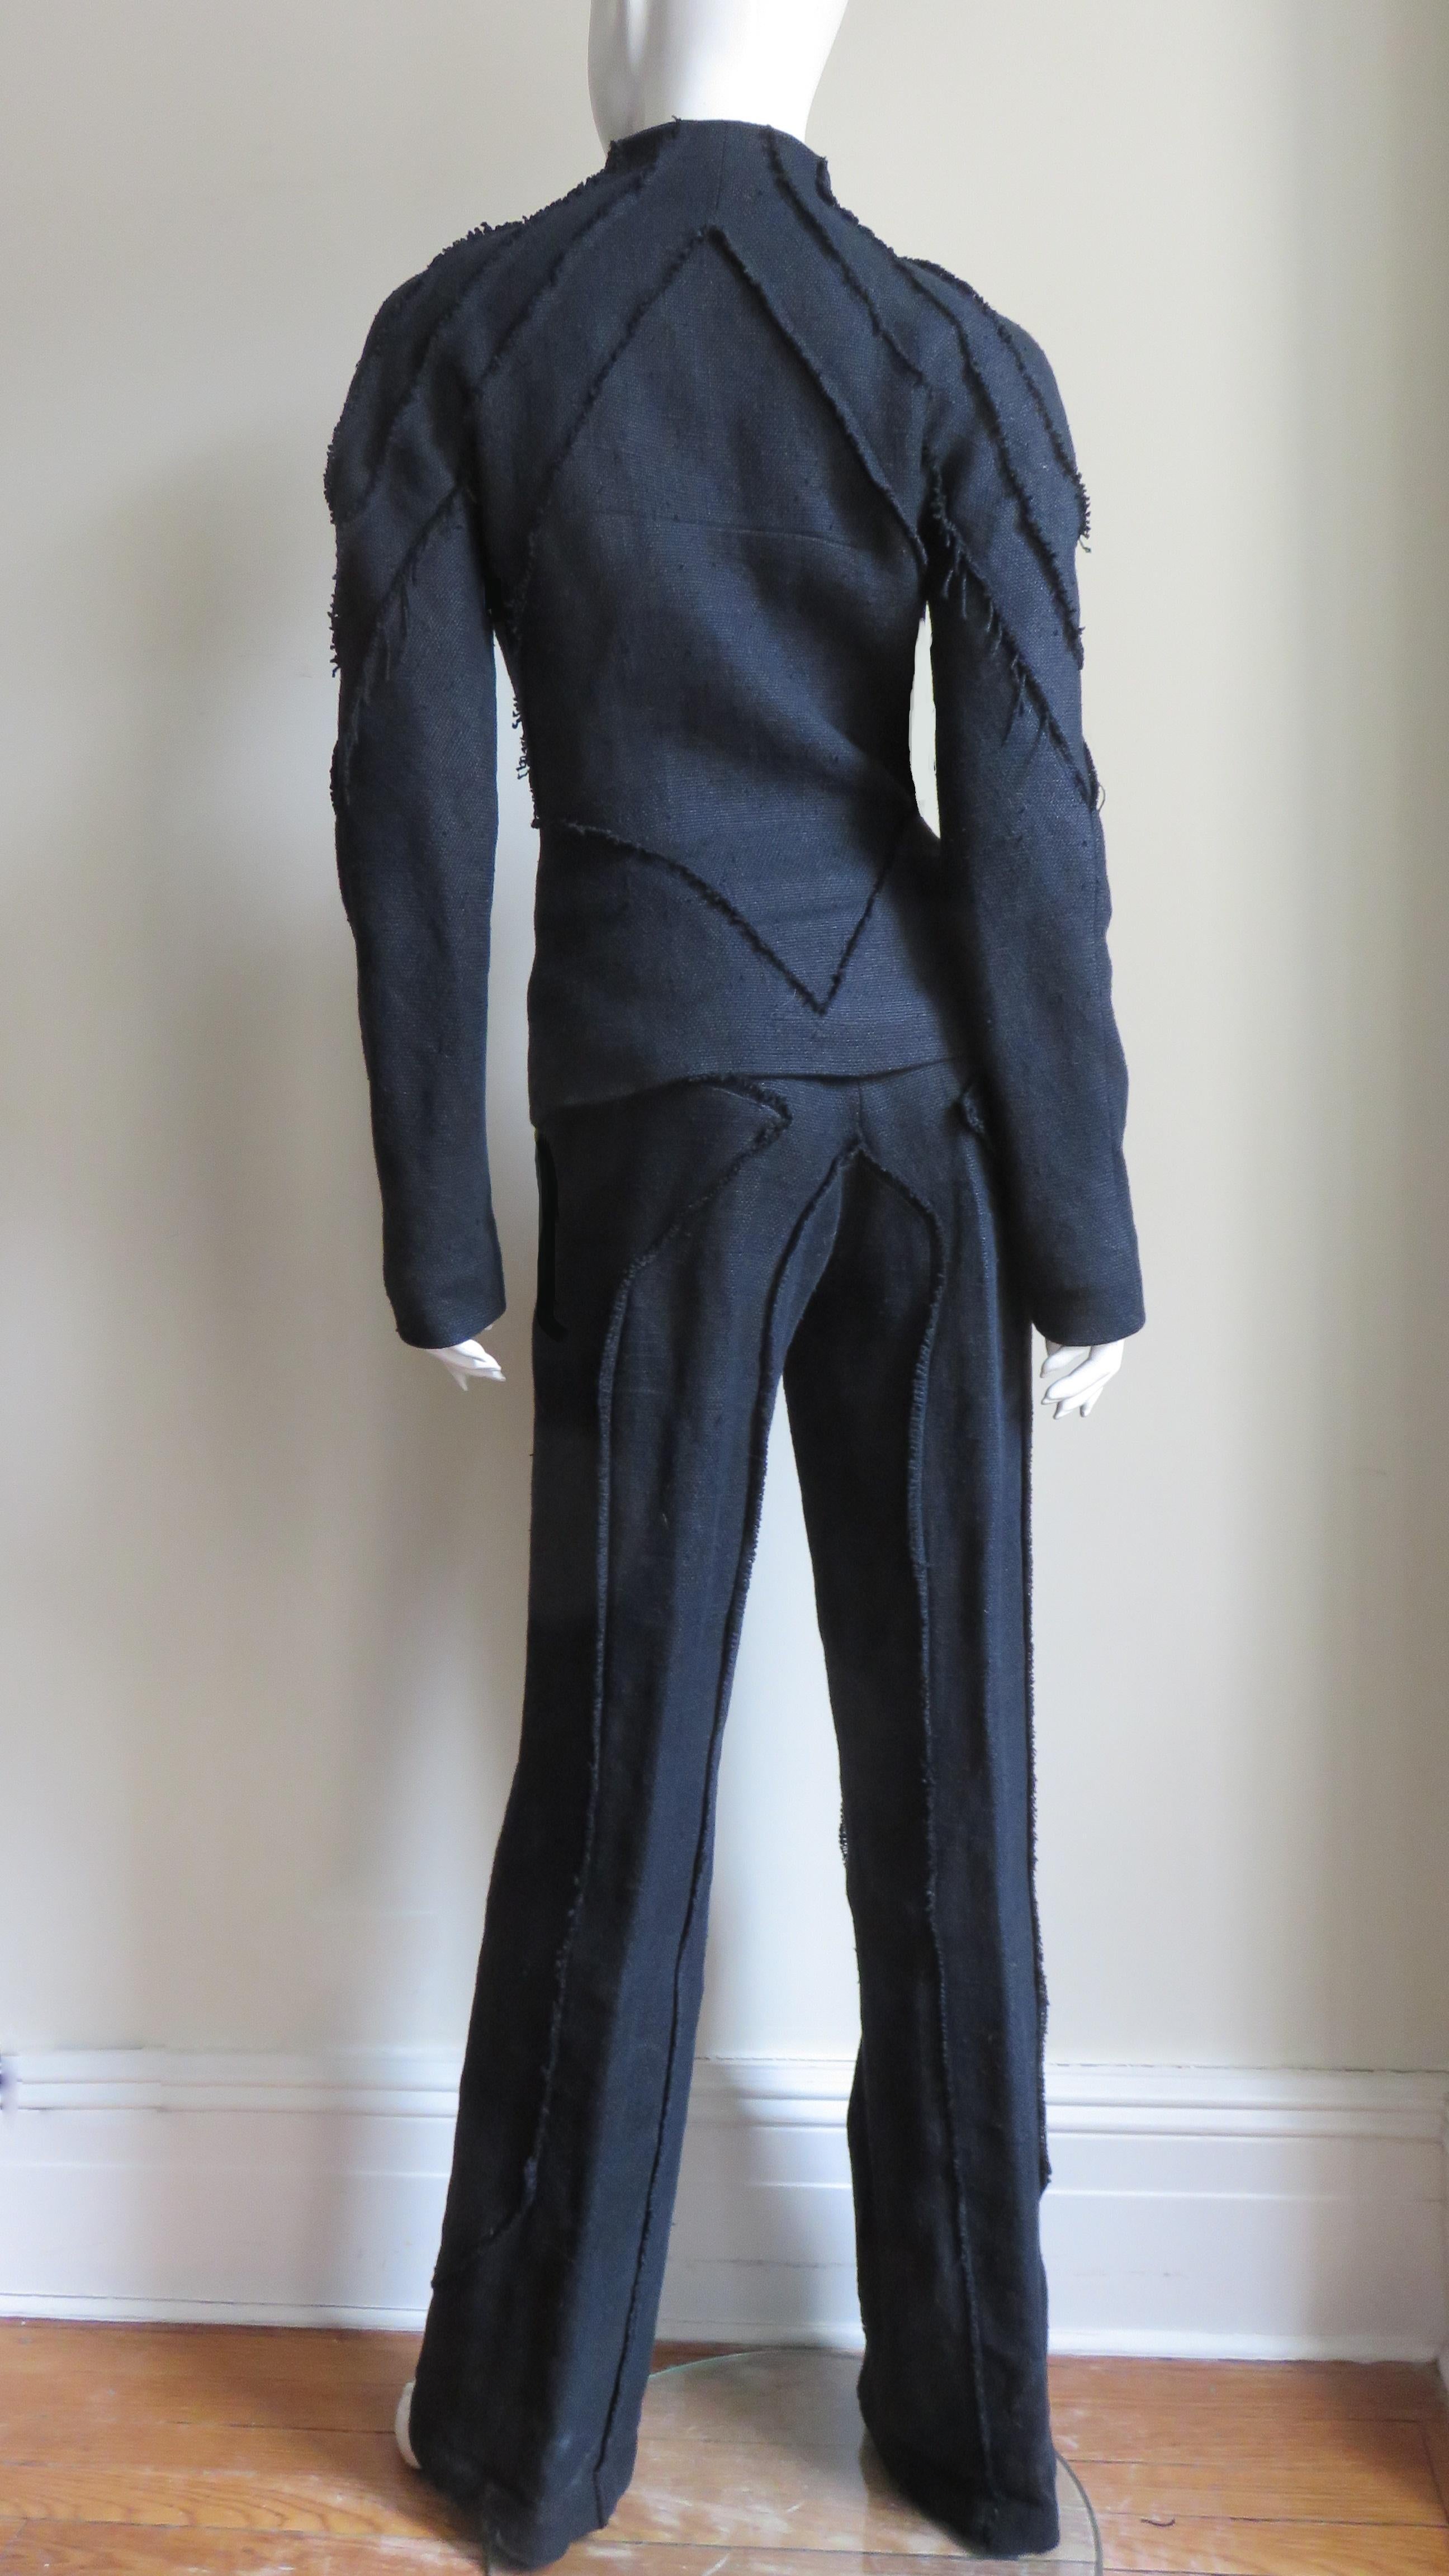 Alexander McQueen New Elaborately Seamed Jacket and Pants A/W 1999 For Sale 6